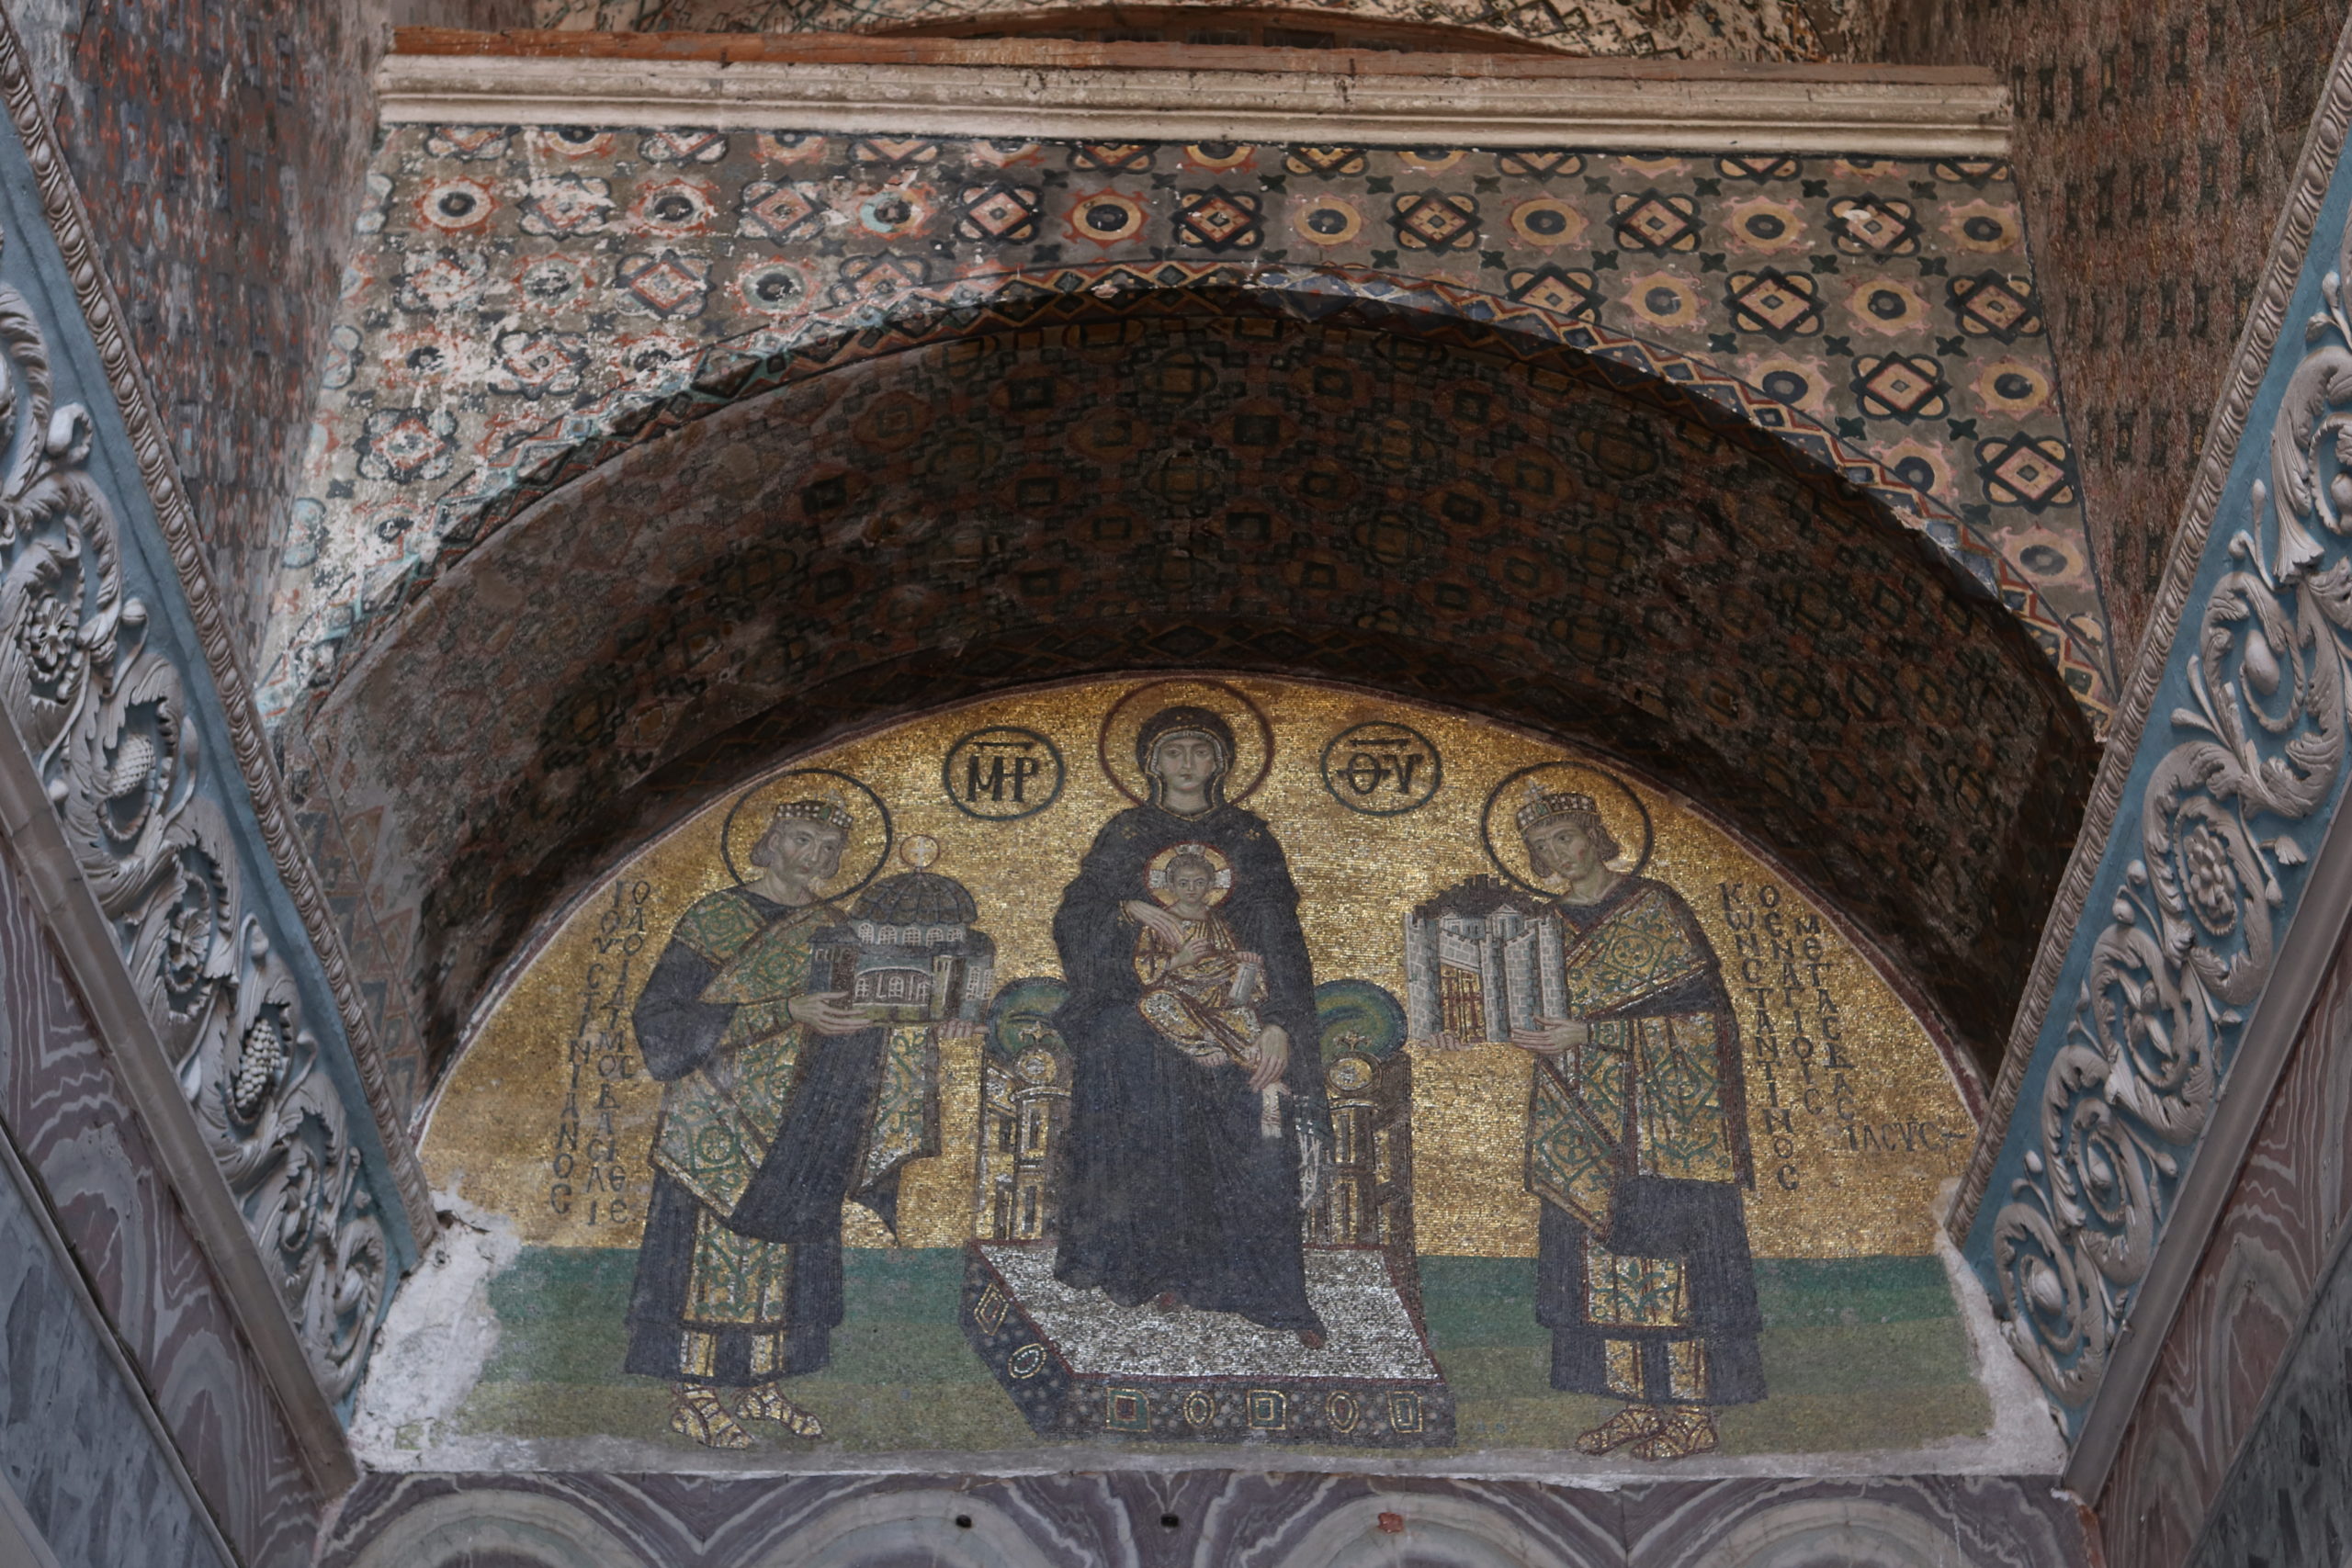 A mosaic that has Mother Mary at the centre